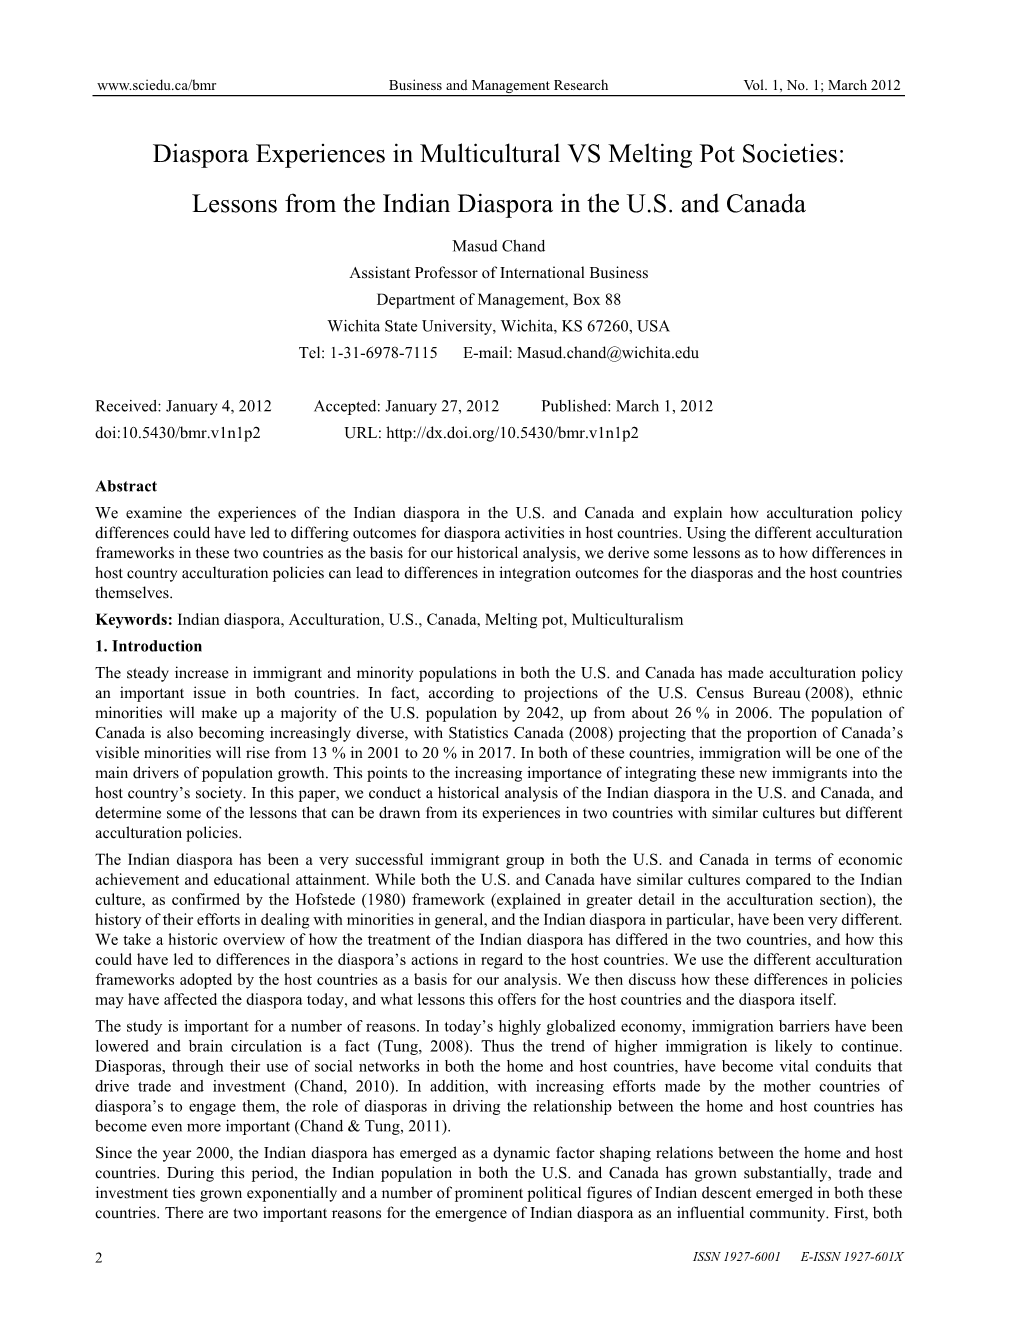 Diaspora Experiences in Multicultural VS Melting Pot Societies: Lessons from the Indian Diaspora in the U.S